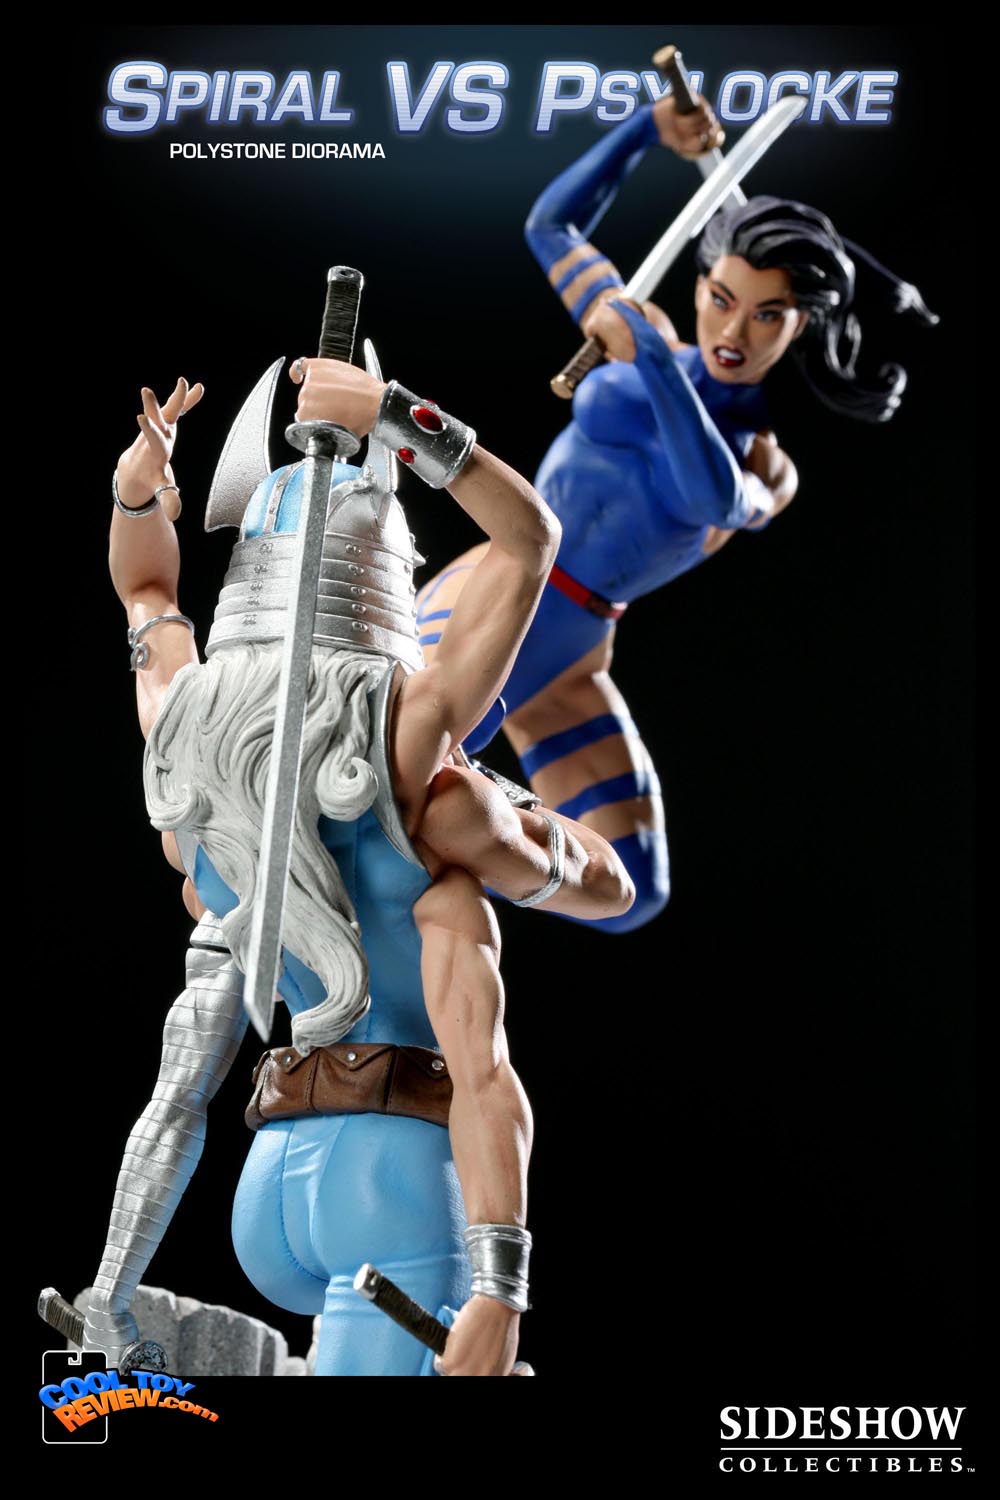 Spiral Vs Psylocke Polystone Diorama fromthe Marvel Comics line by Sideshow Collectibles